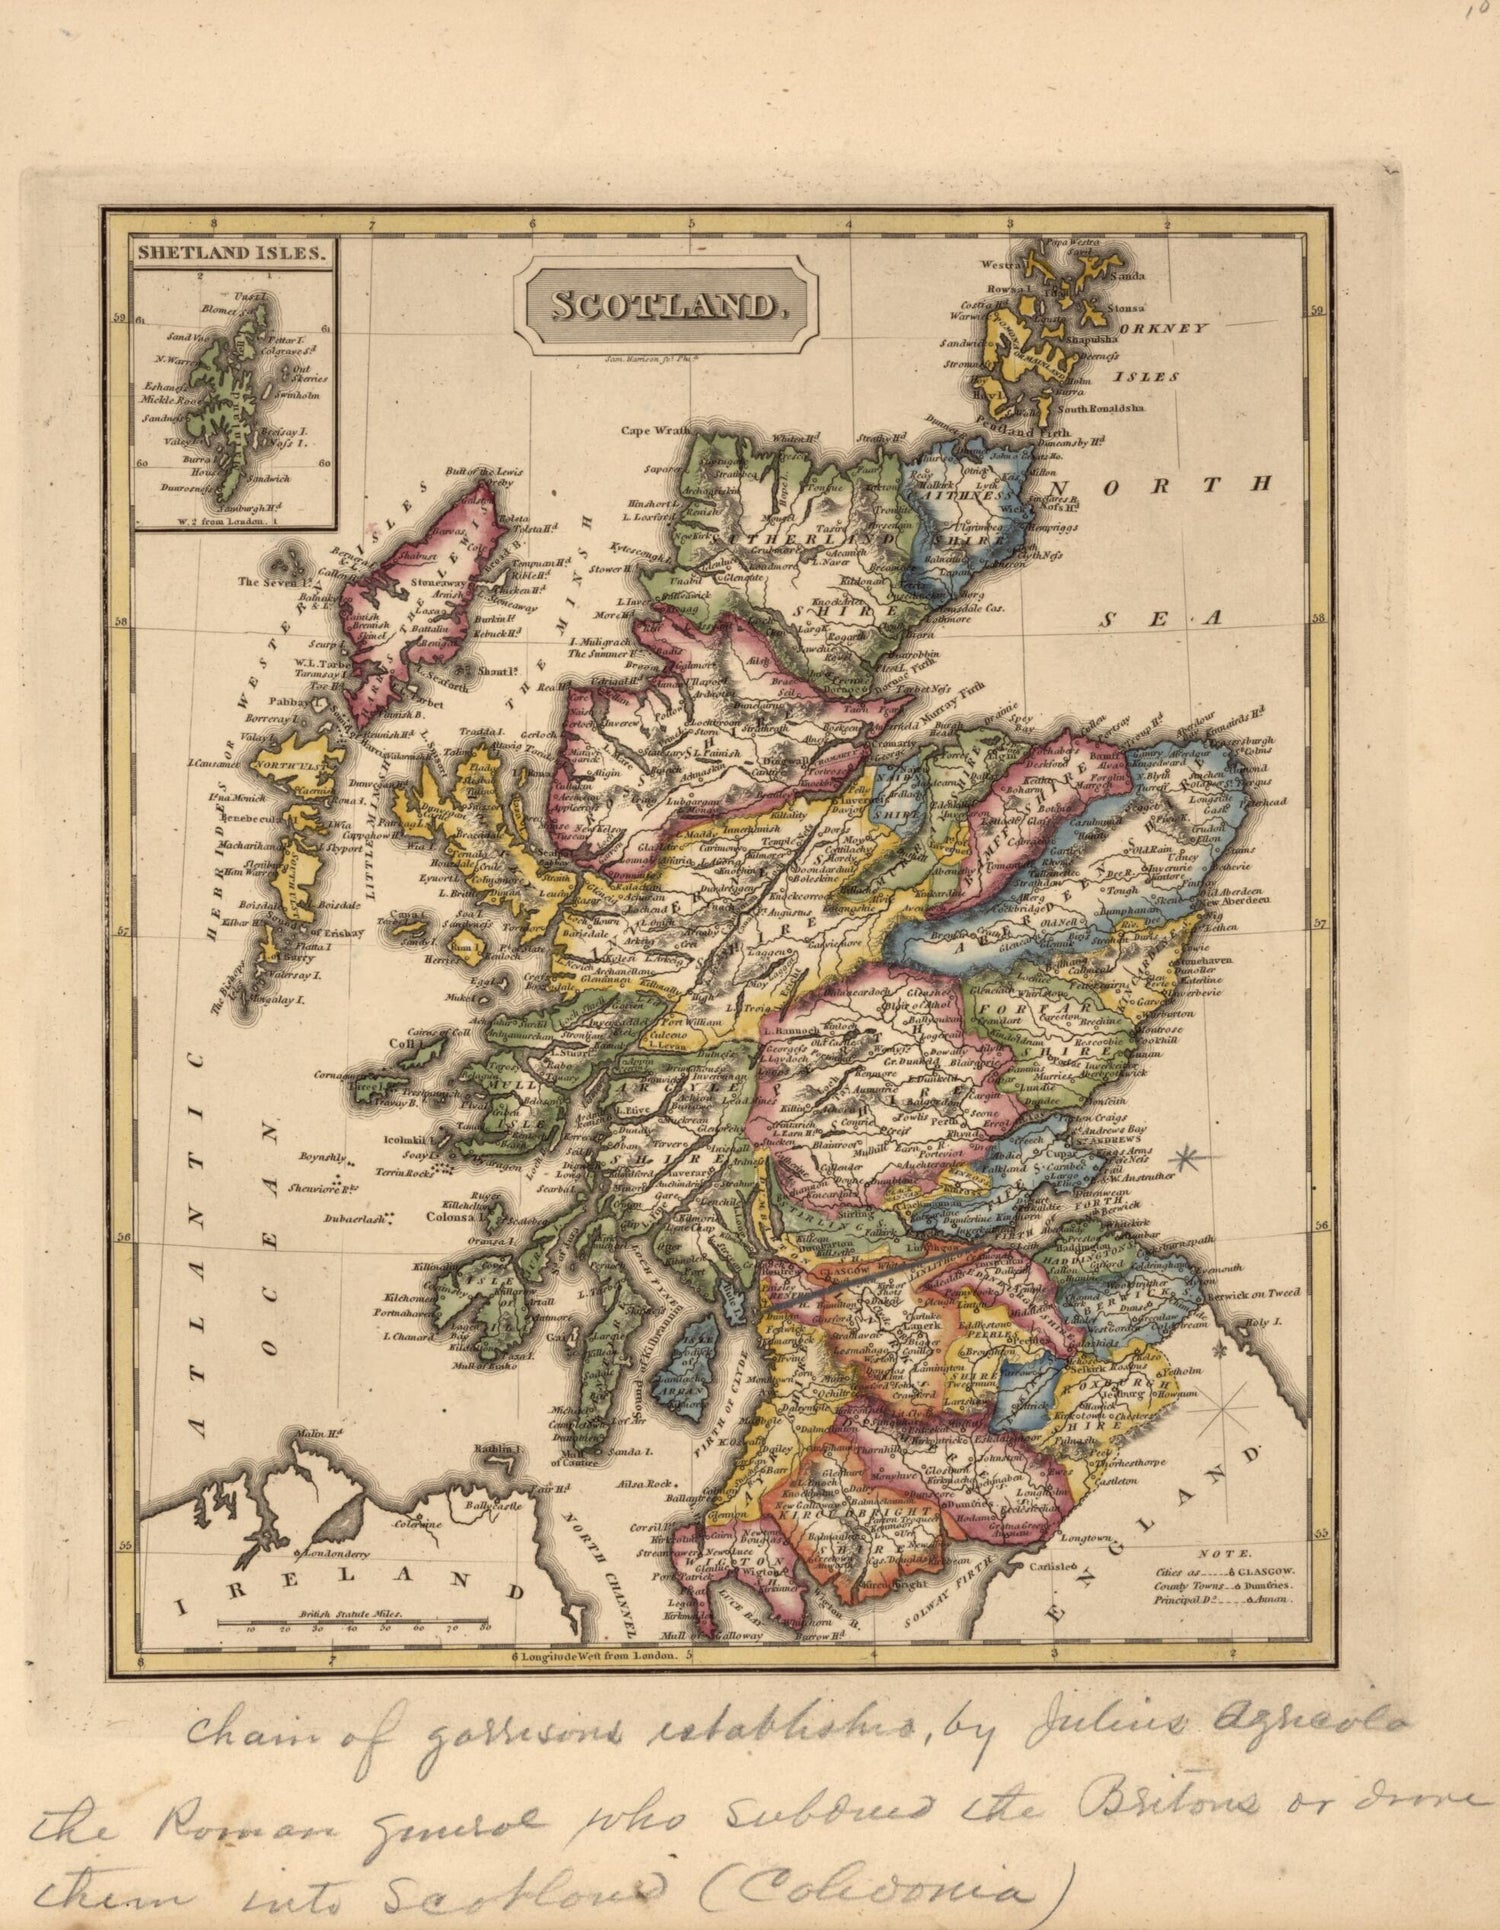 This old map of Scotland from a New and Elegant General Atlas, Containing Maps of Each of the United States. from 1817 was created by Henry Schenck Tanner in 1817